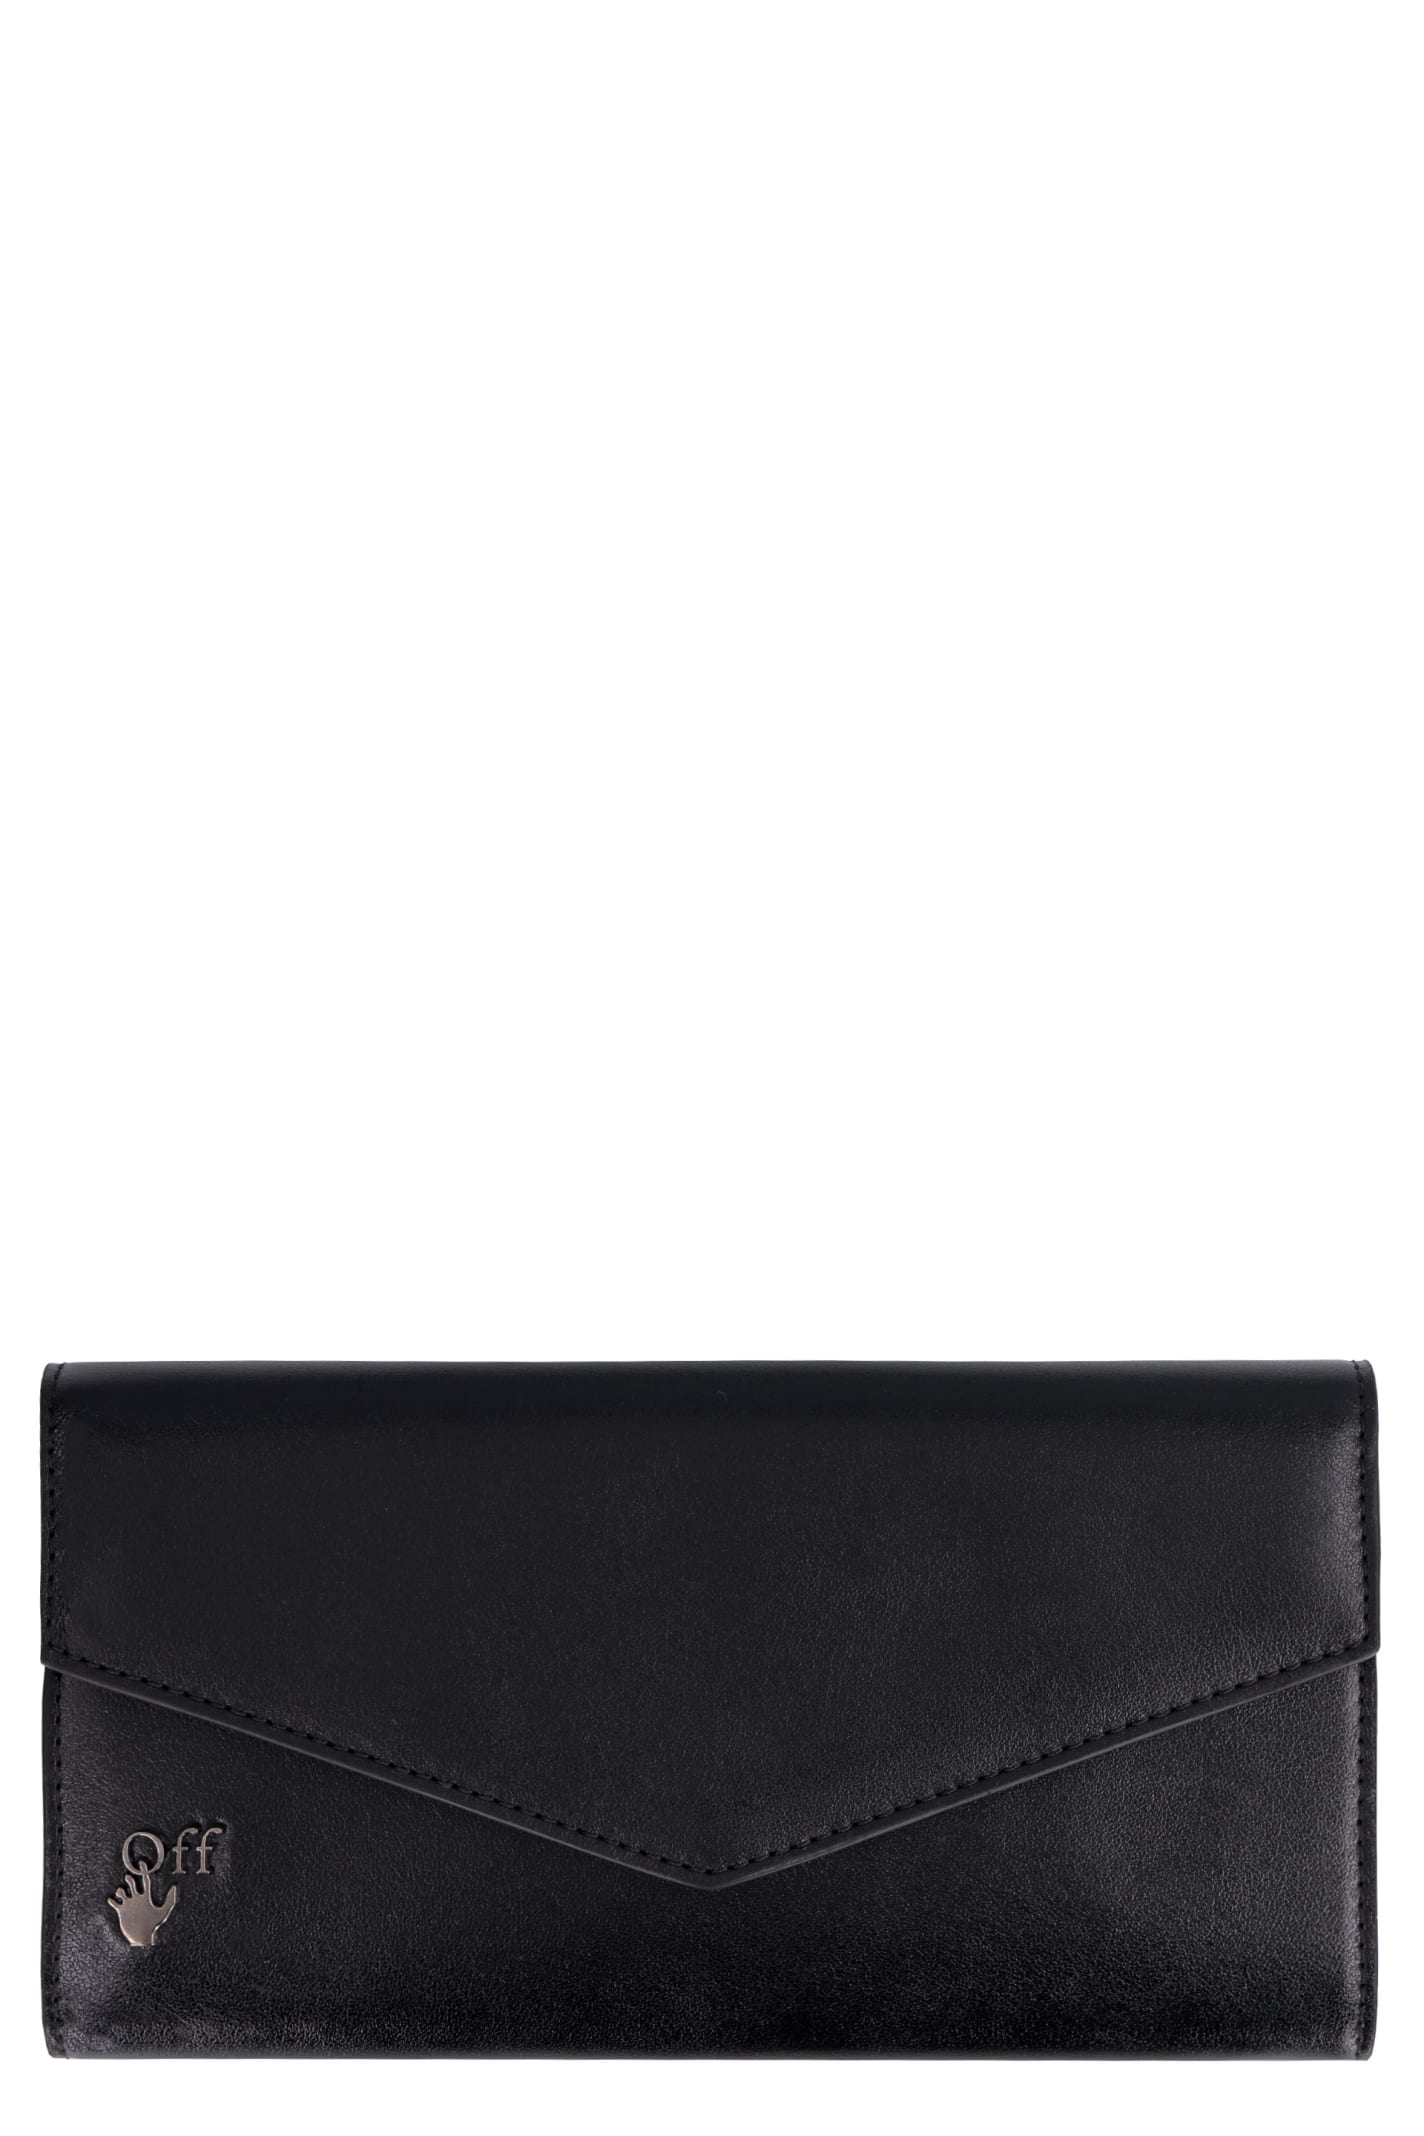 Off-White Leather Flap-over Continental Wallet